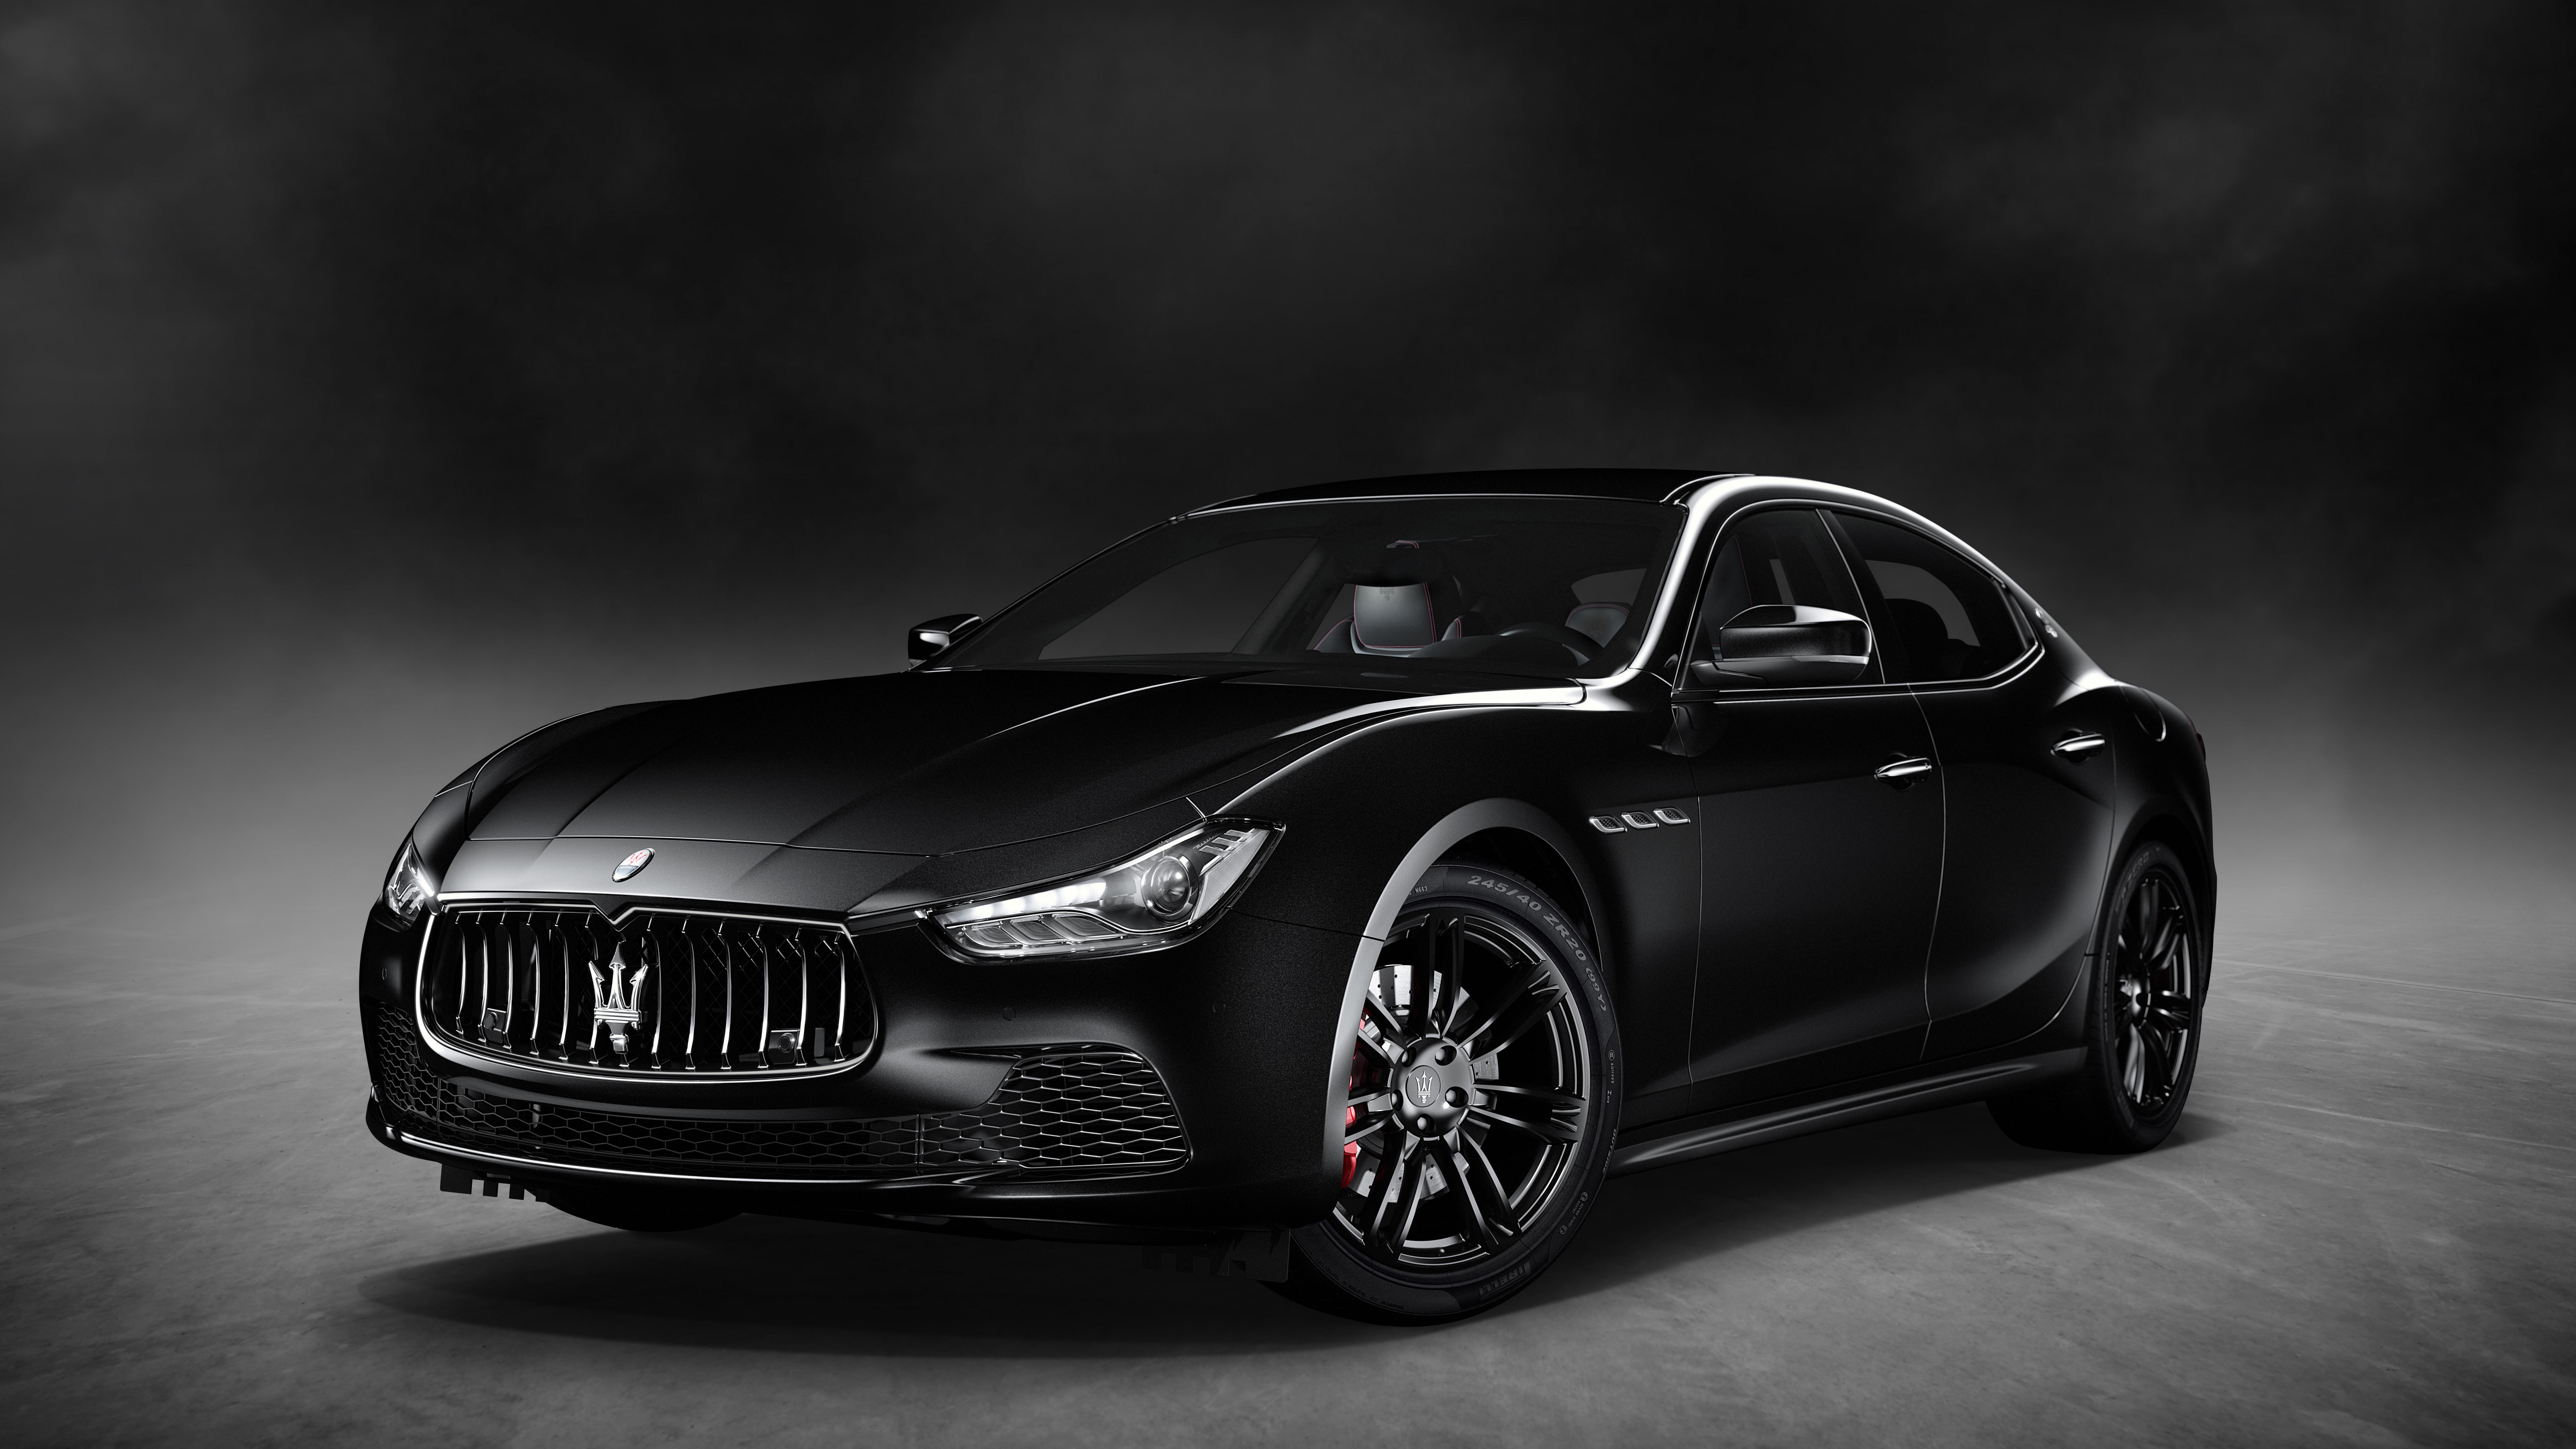 Grayscale Photo of Mercedes Benz Coupe. Wallpaper in 7680x4320 Resolution